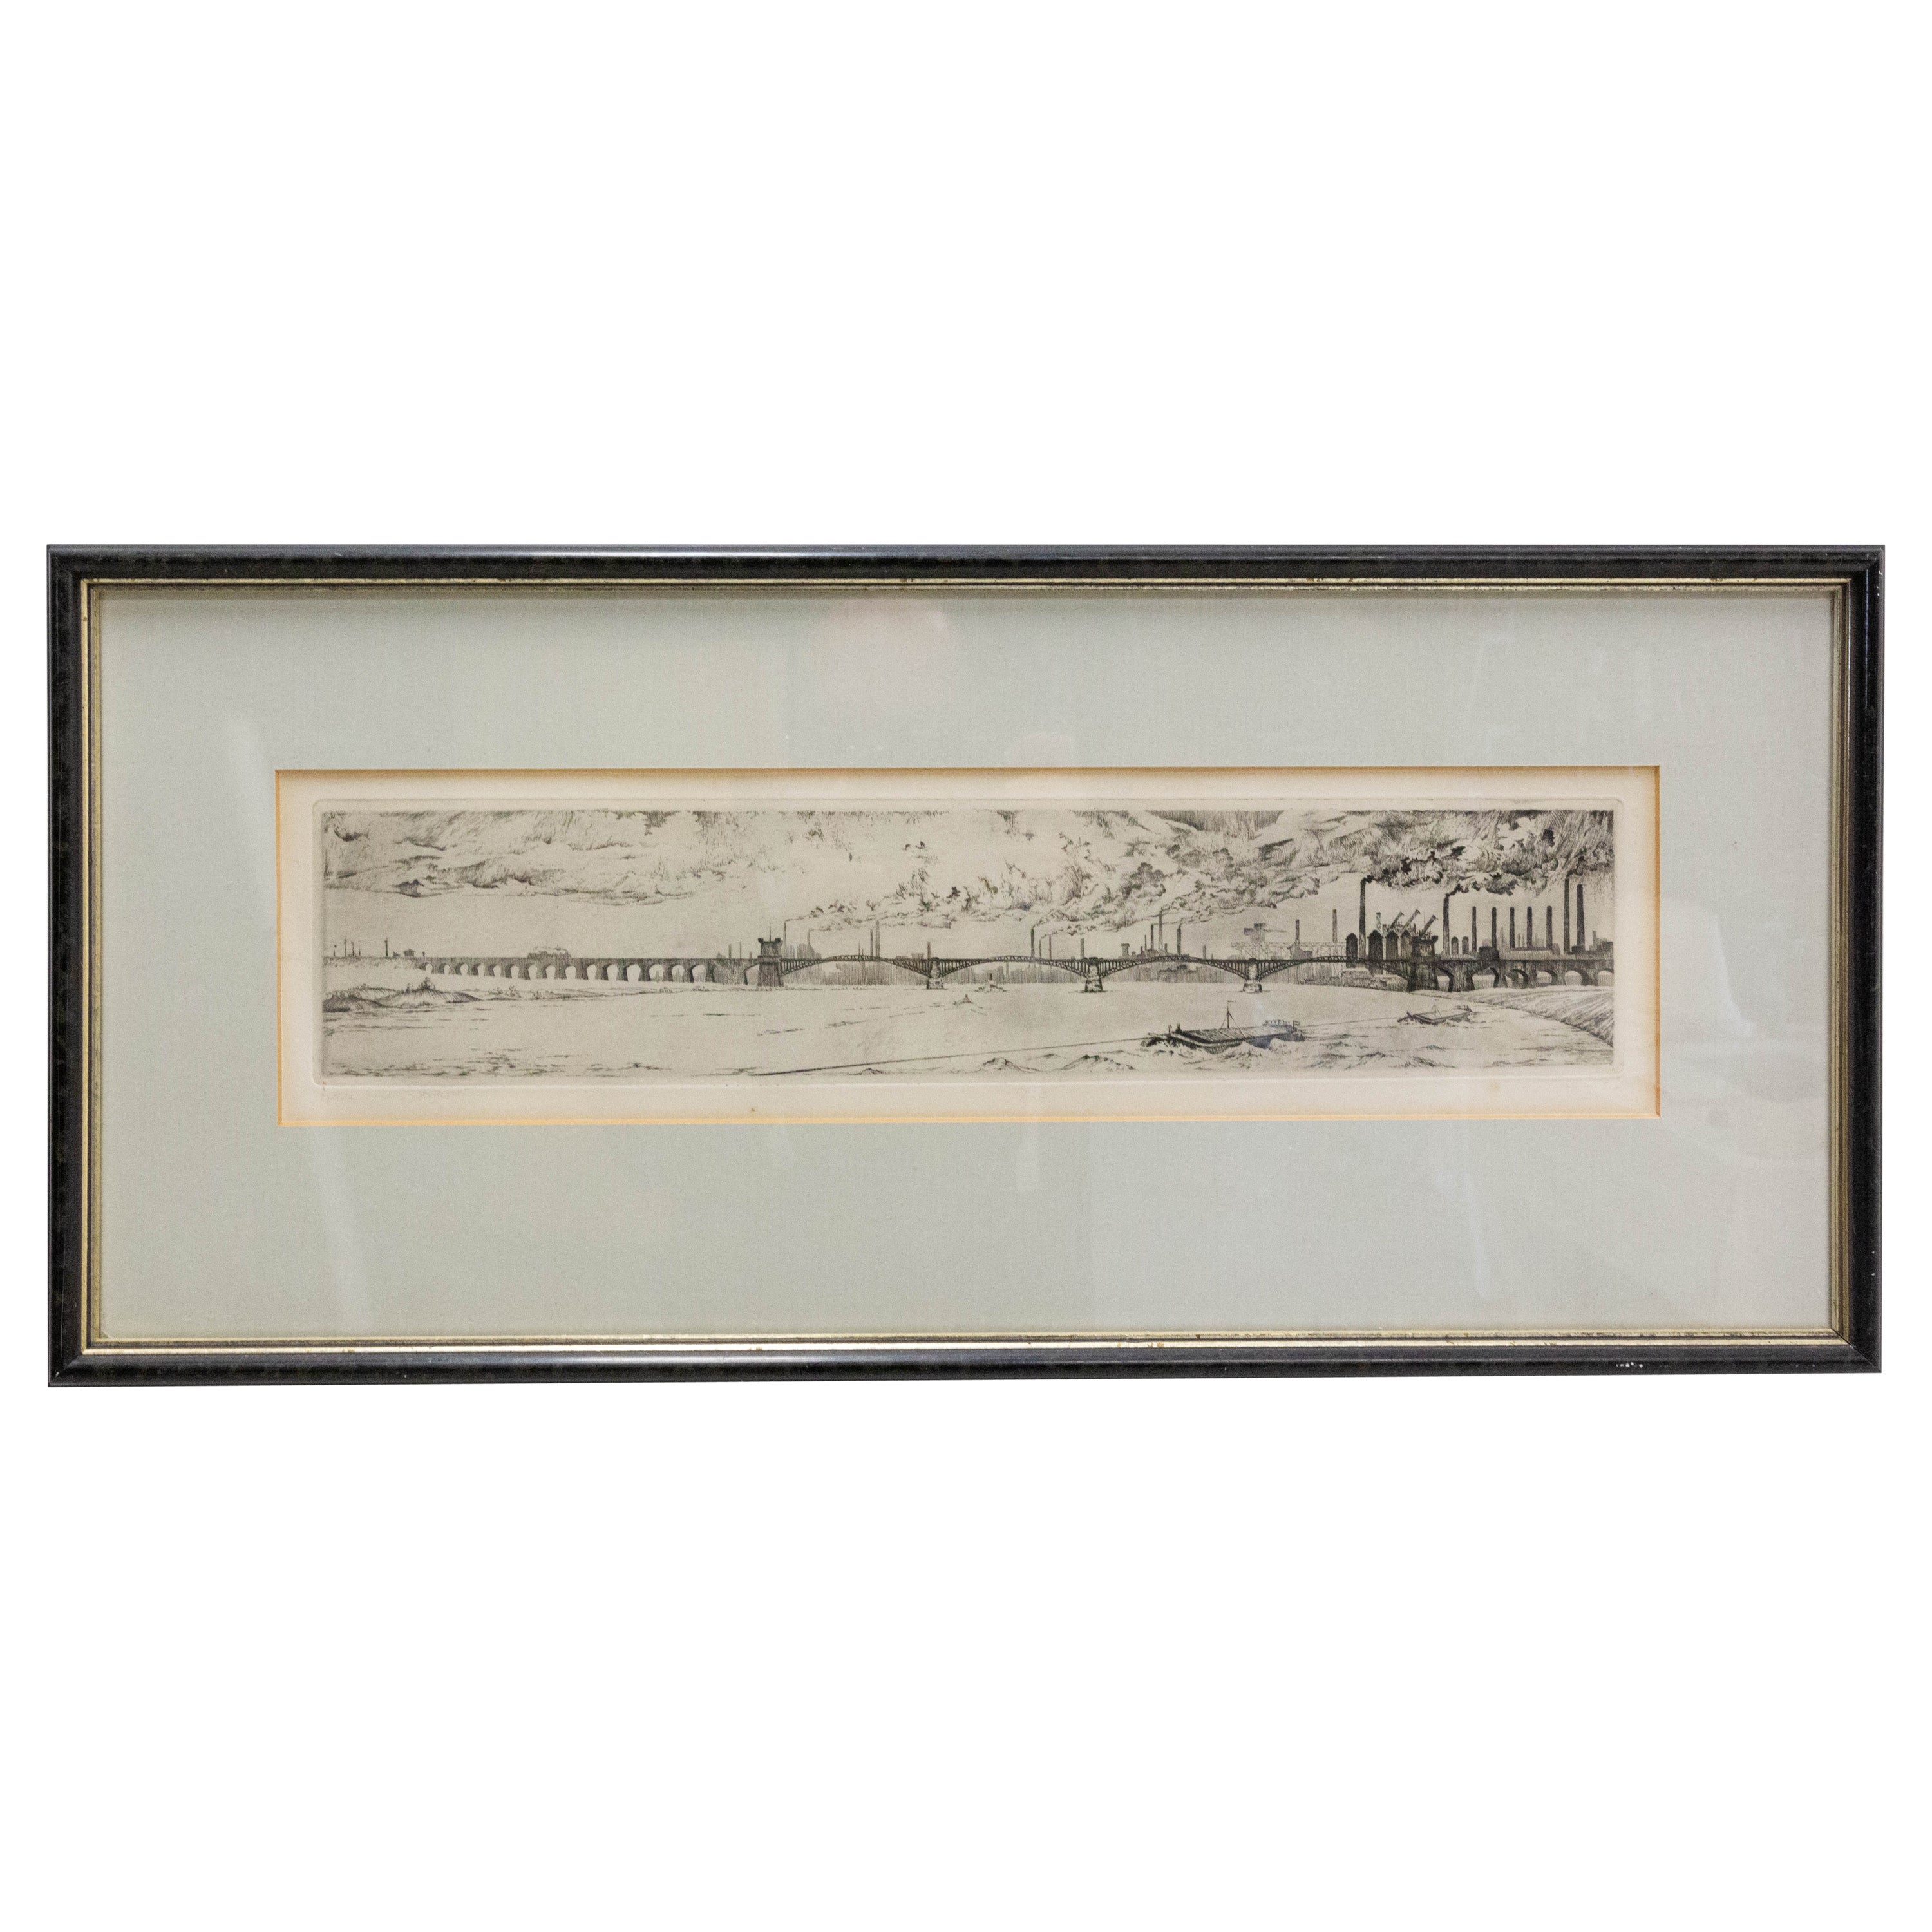 Engraving Industrial Landscape Railway Bridge, Germany, Late 19th Century For Sale